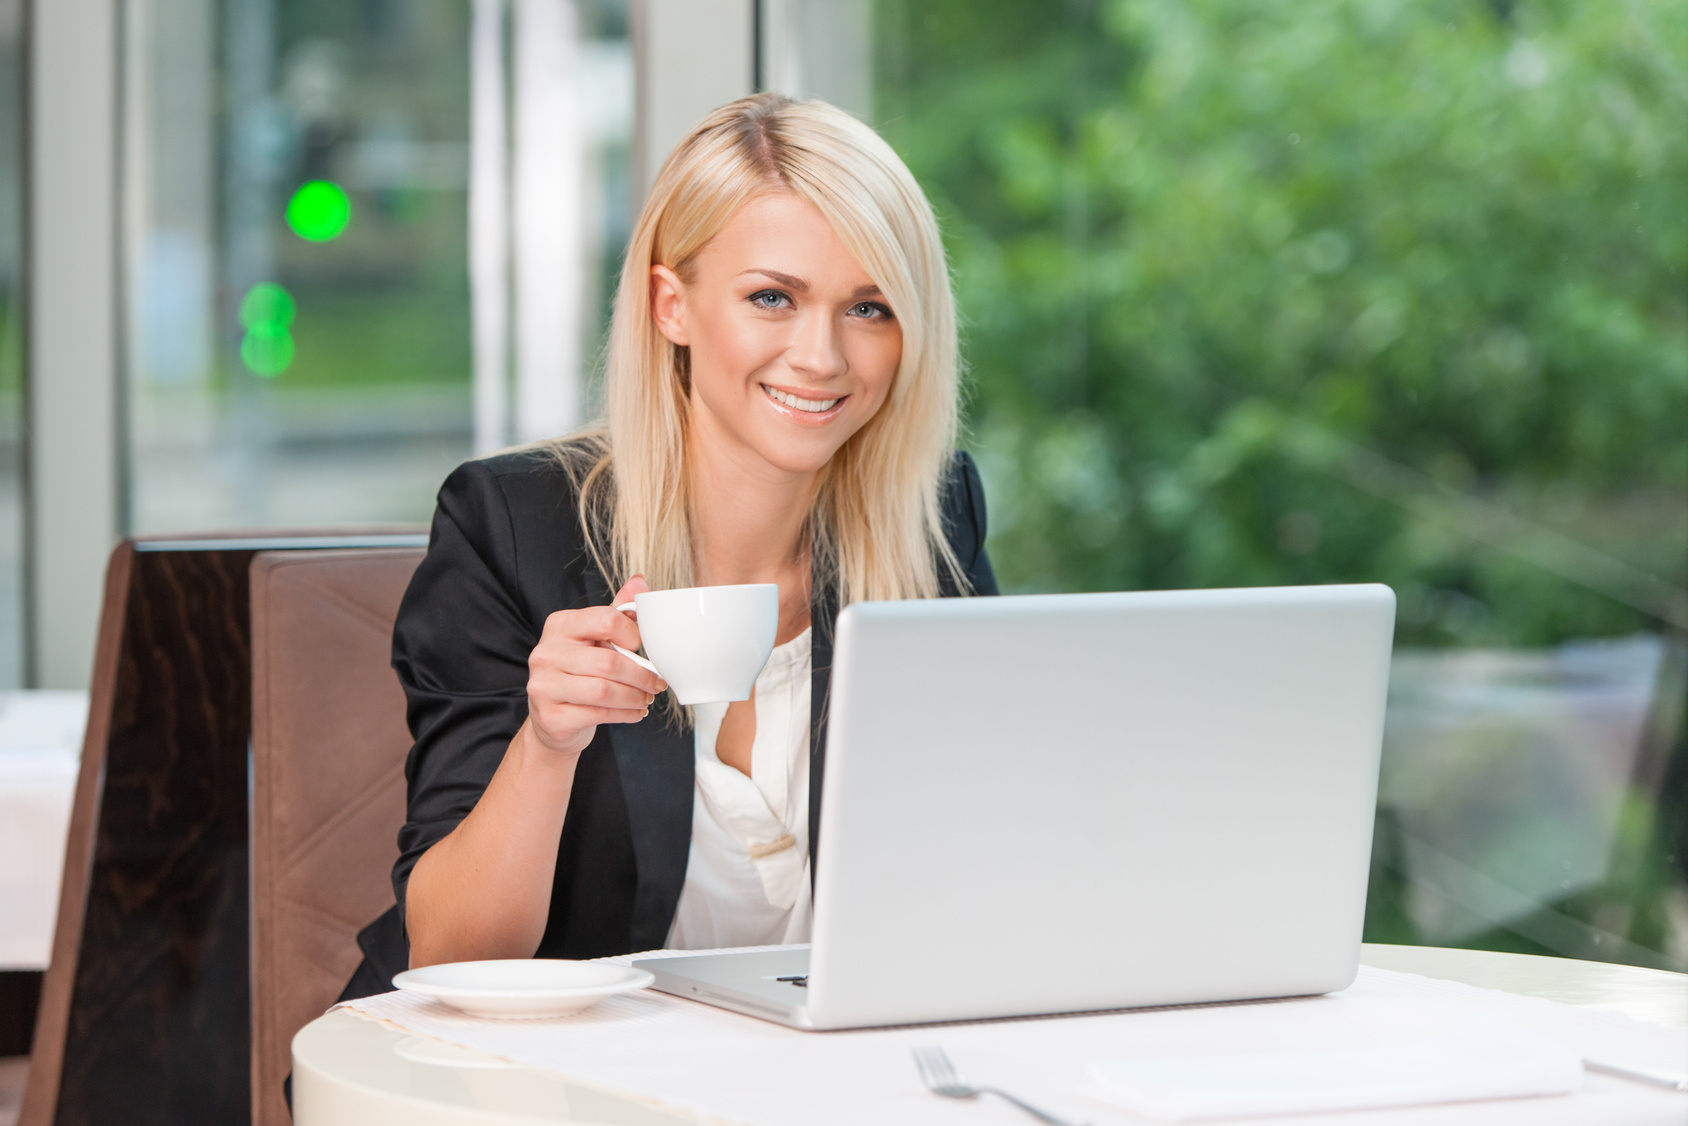 Blond business lady smiling at camera while sitting and drinking coffee or tea.